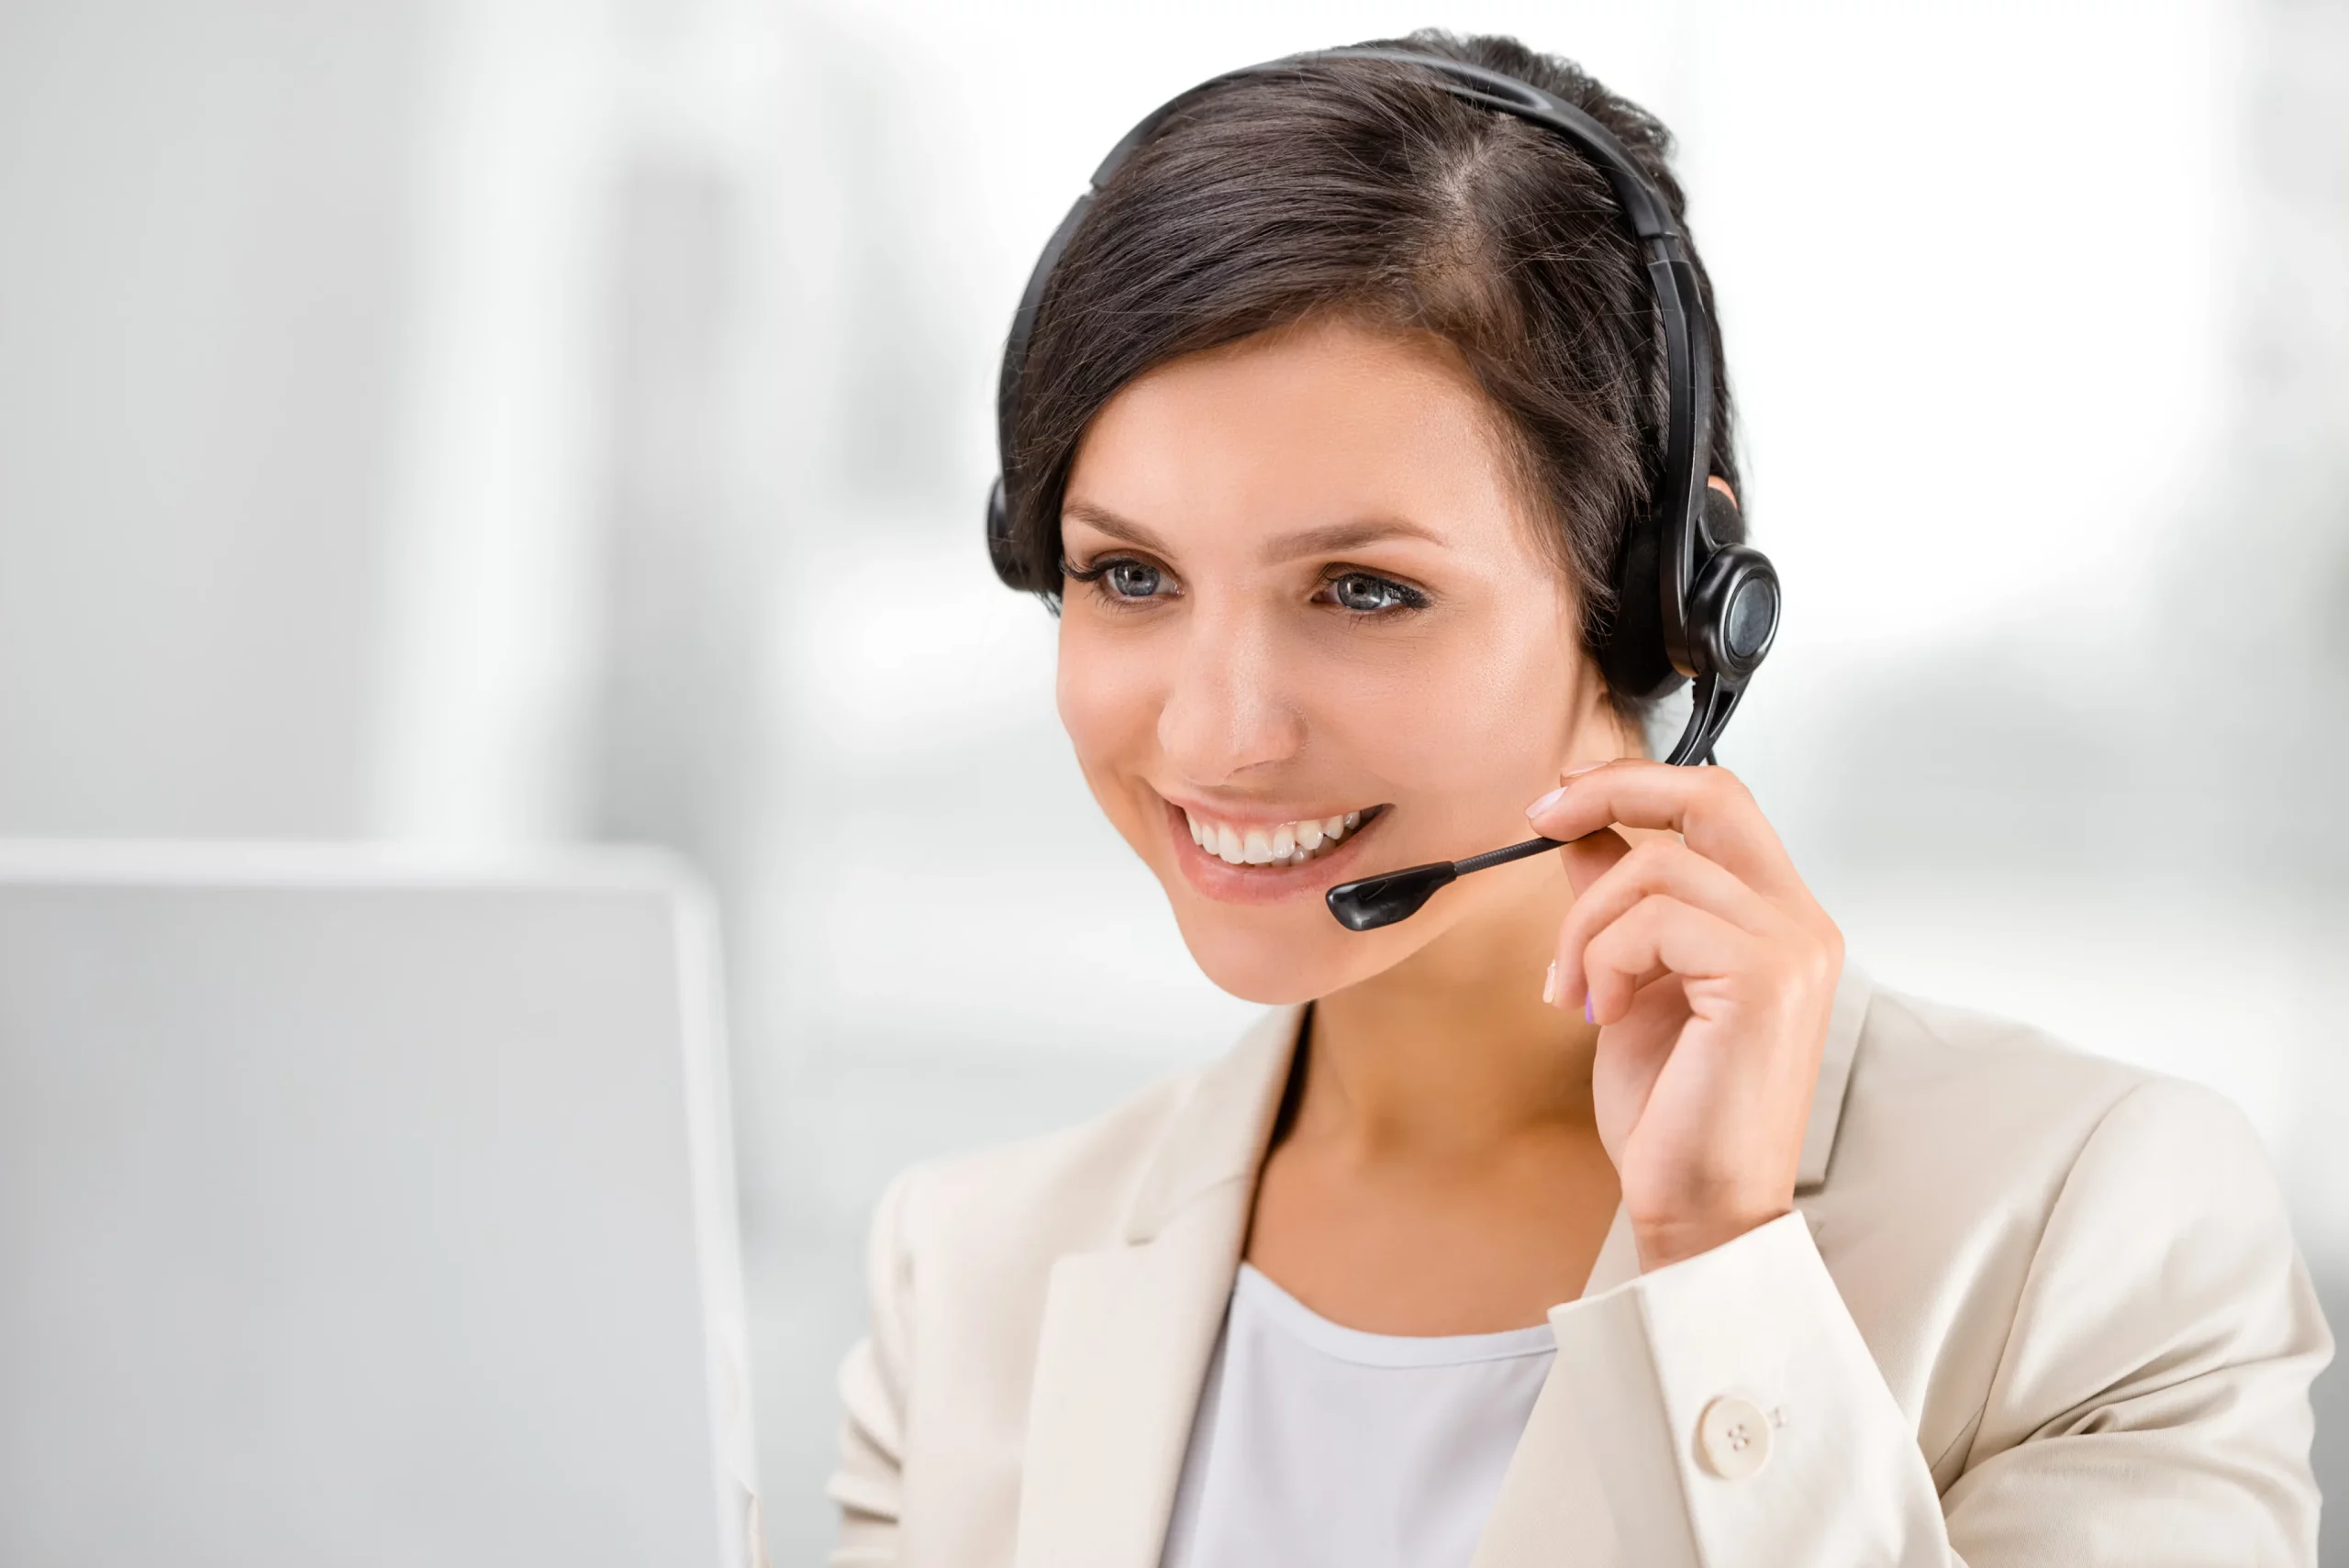 The Benefits of Using a Remote Receptionist